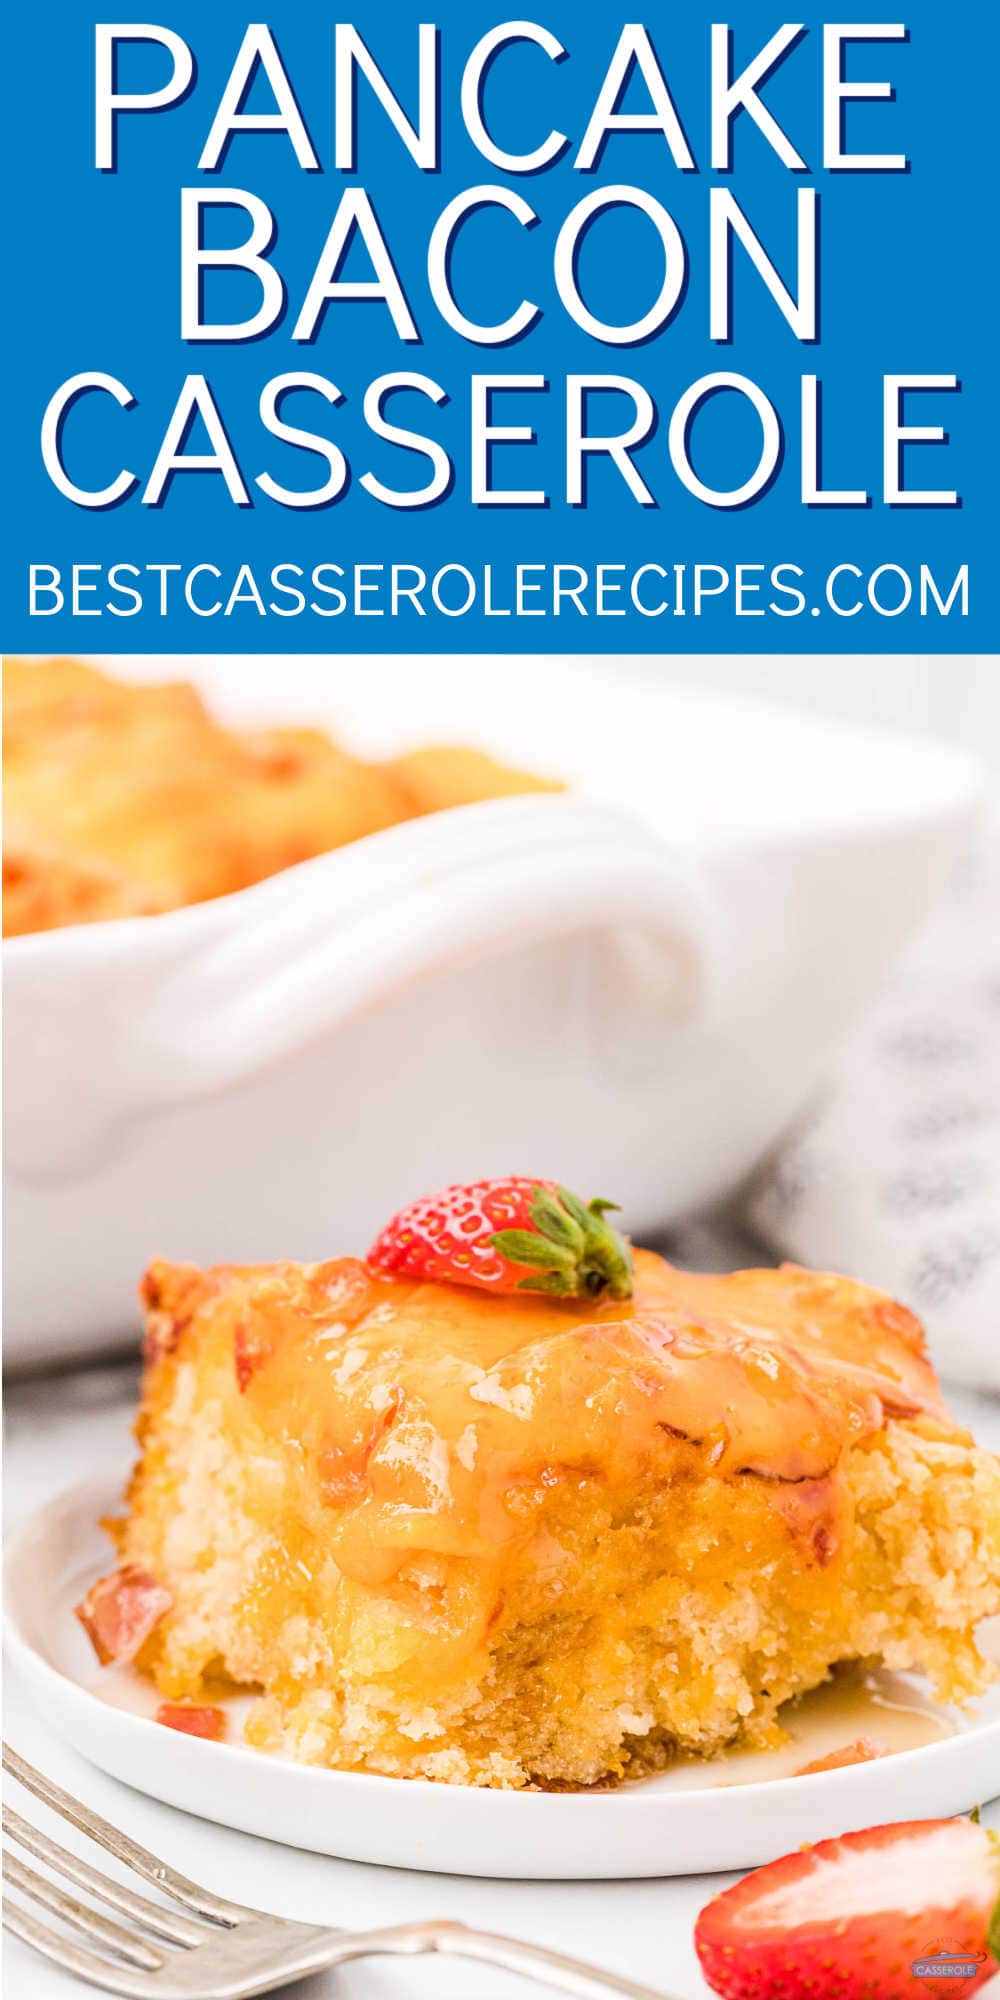 piece of pancake casserole on a white plate with a blue banner and text